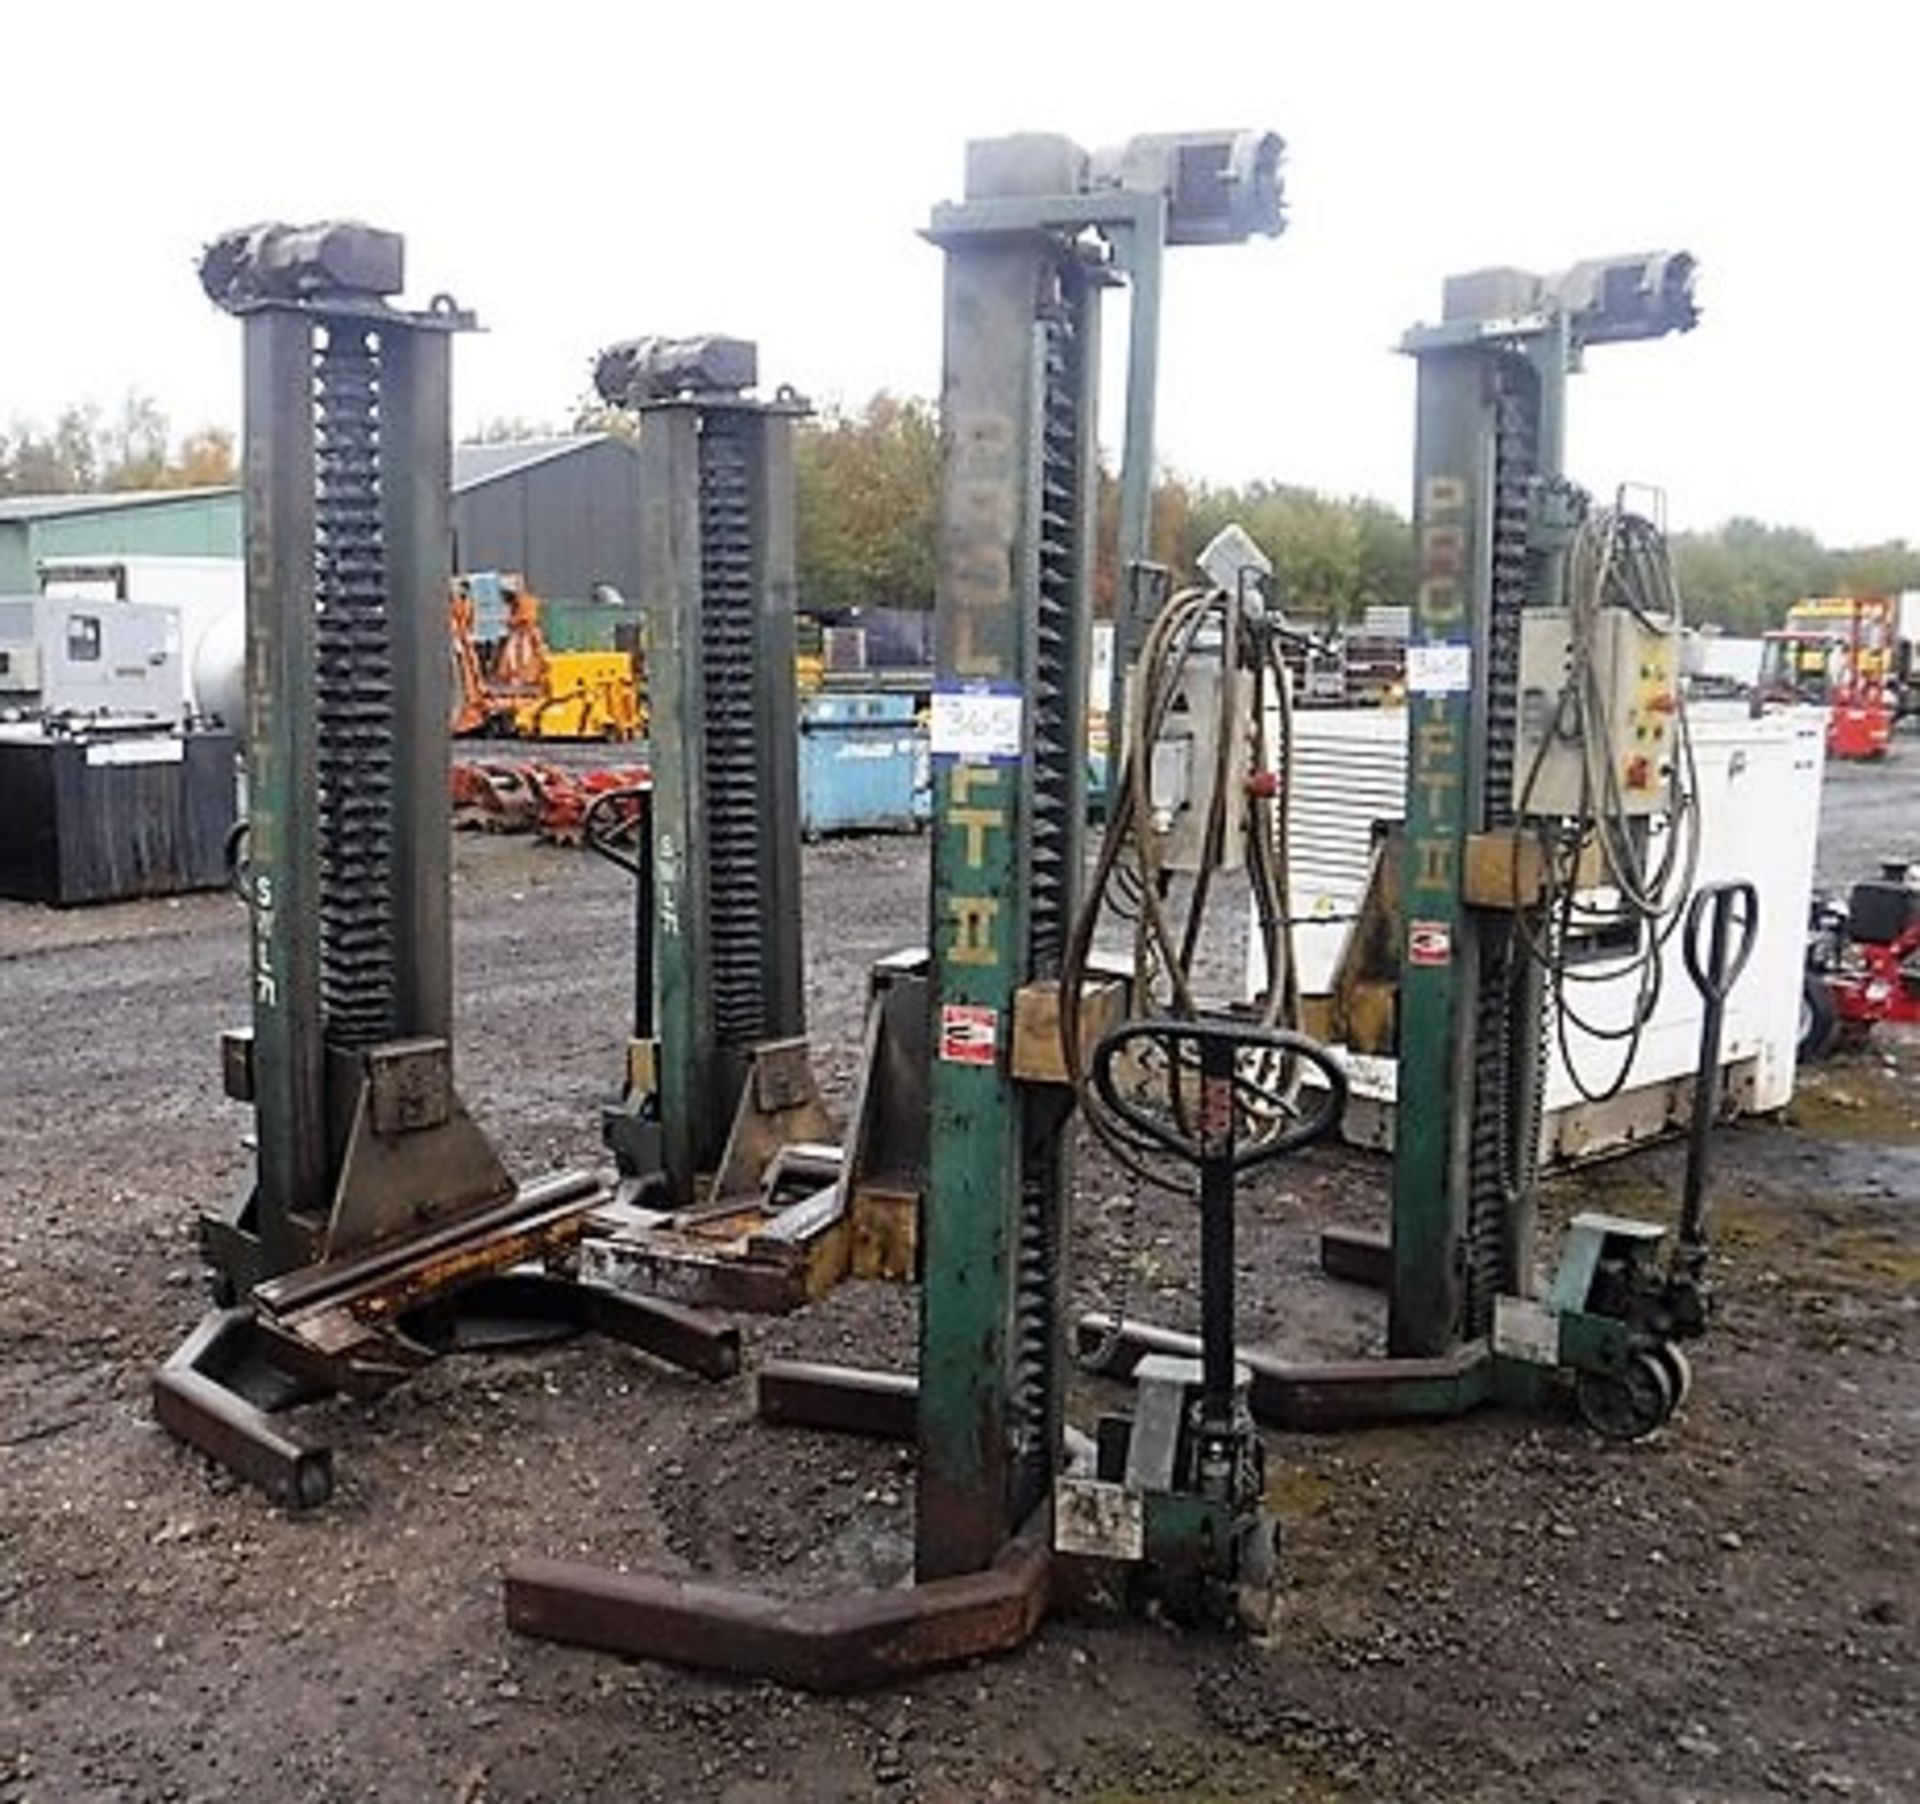 PROLIFT II 3 phase heavy good lifts. These lifts were used for the maintenance for single & double c